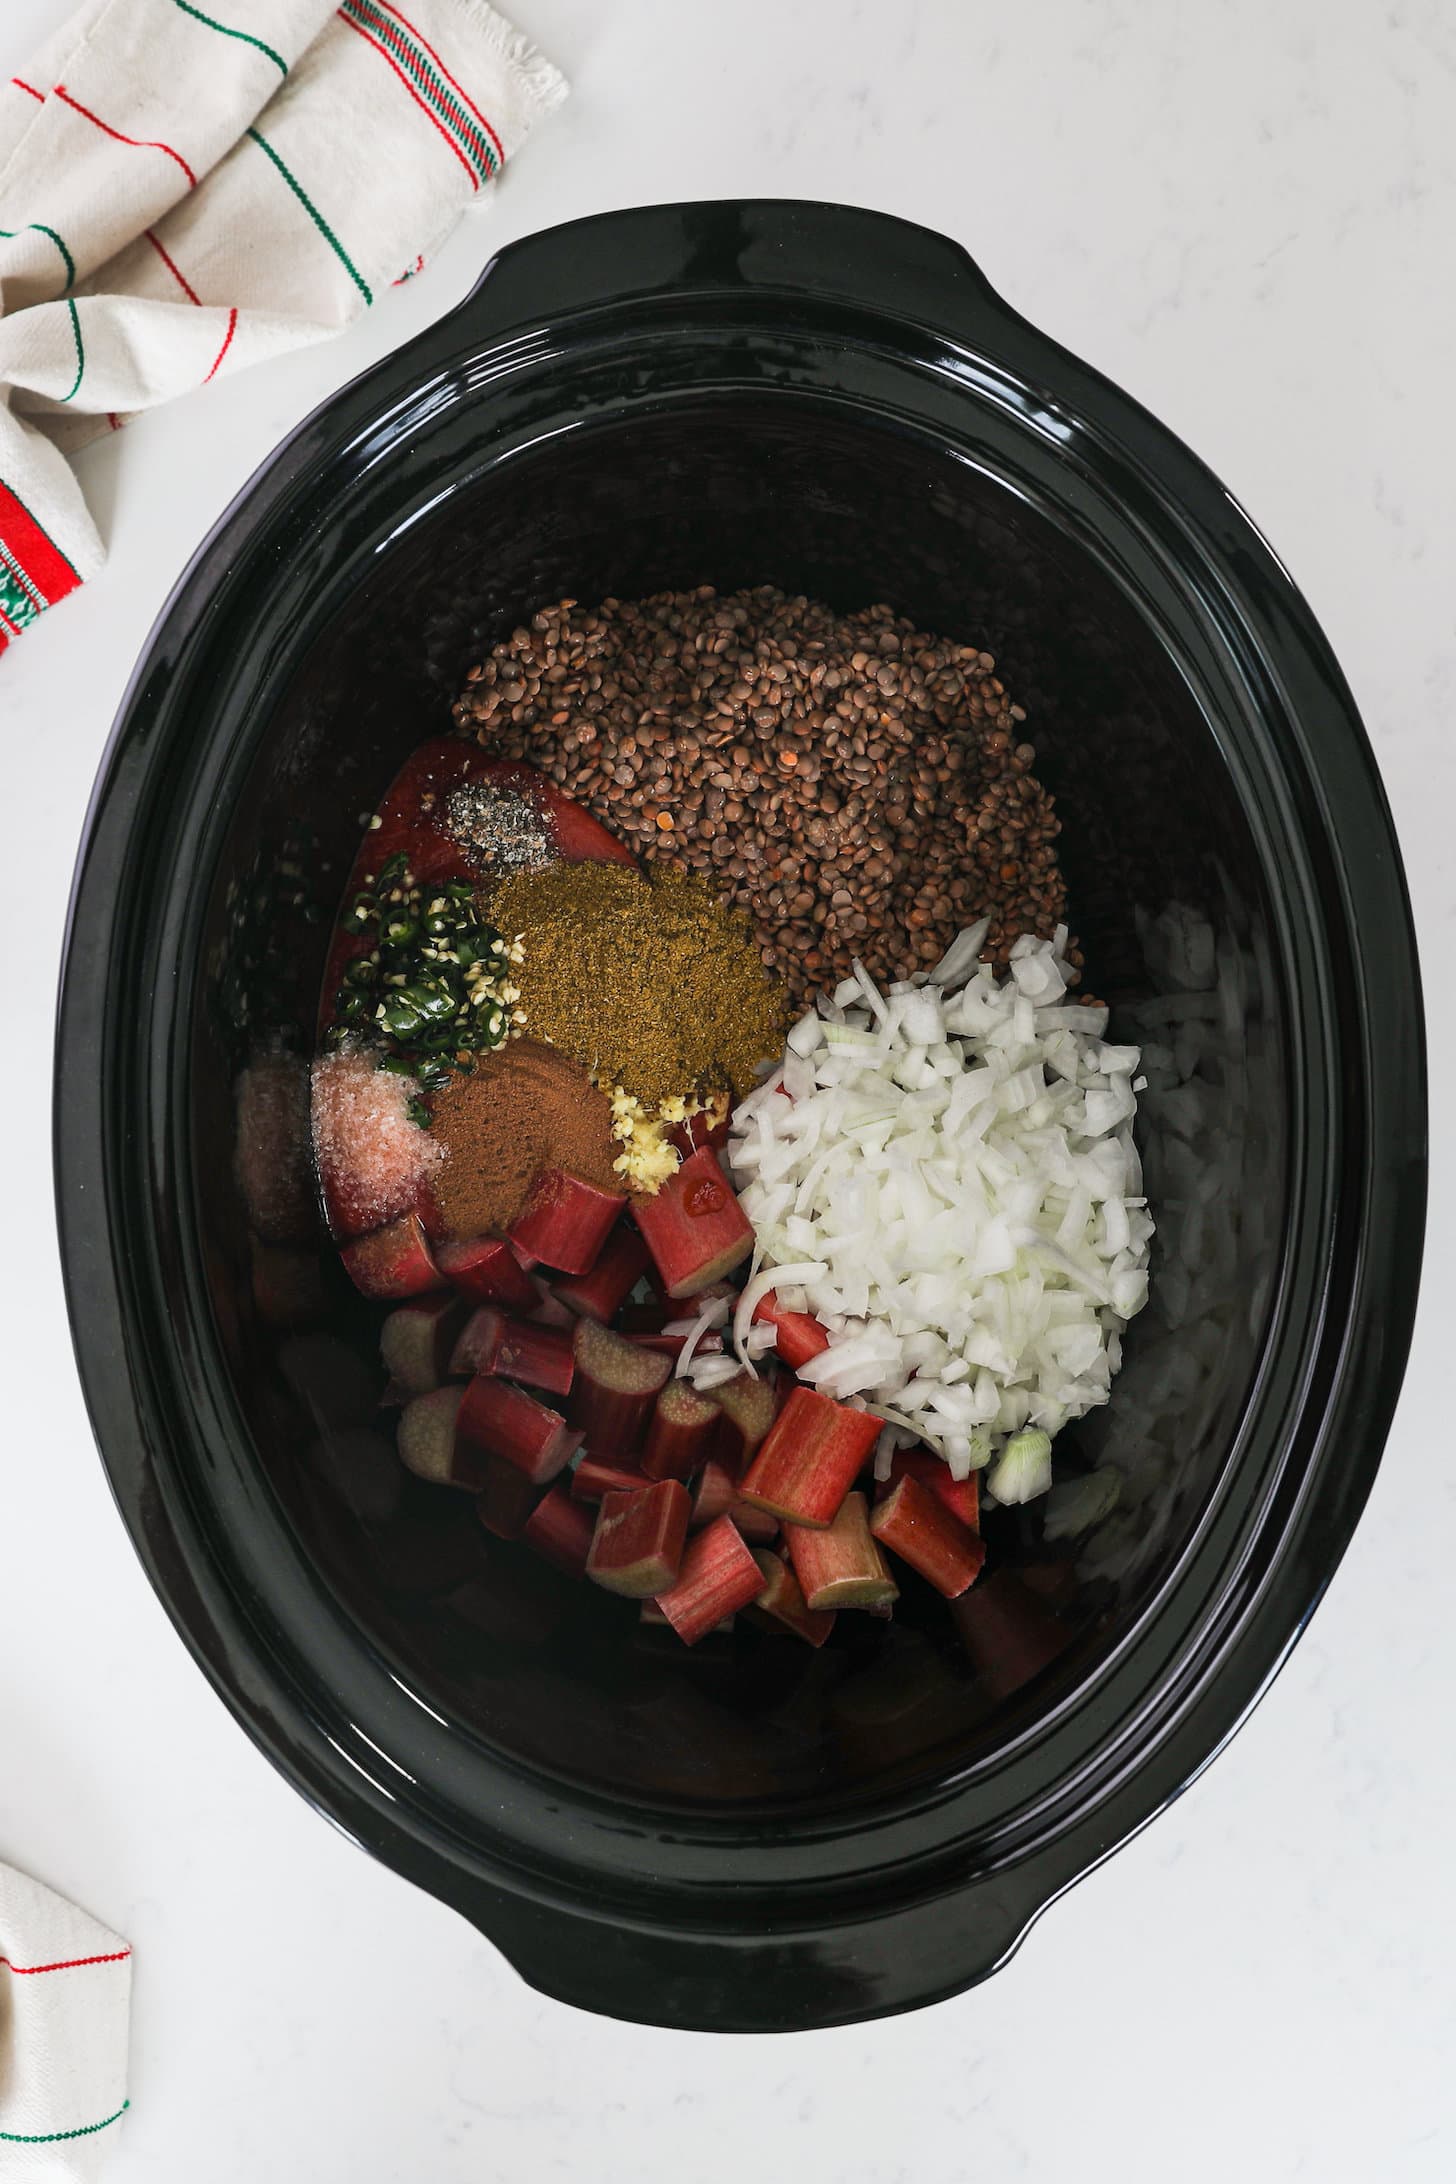 overhead shot of a black clay pot with ingredients arranged in it, featuring lentils, onion, rhubarb and spices.